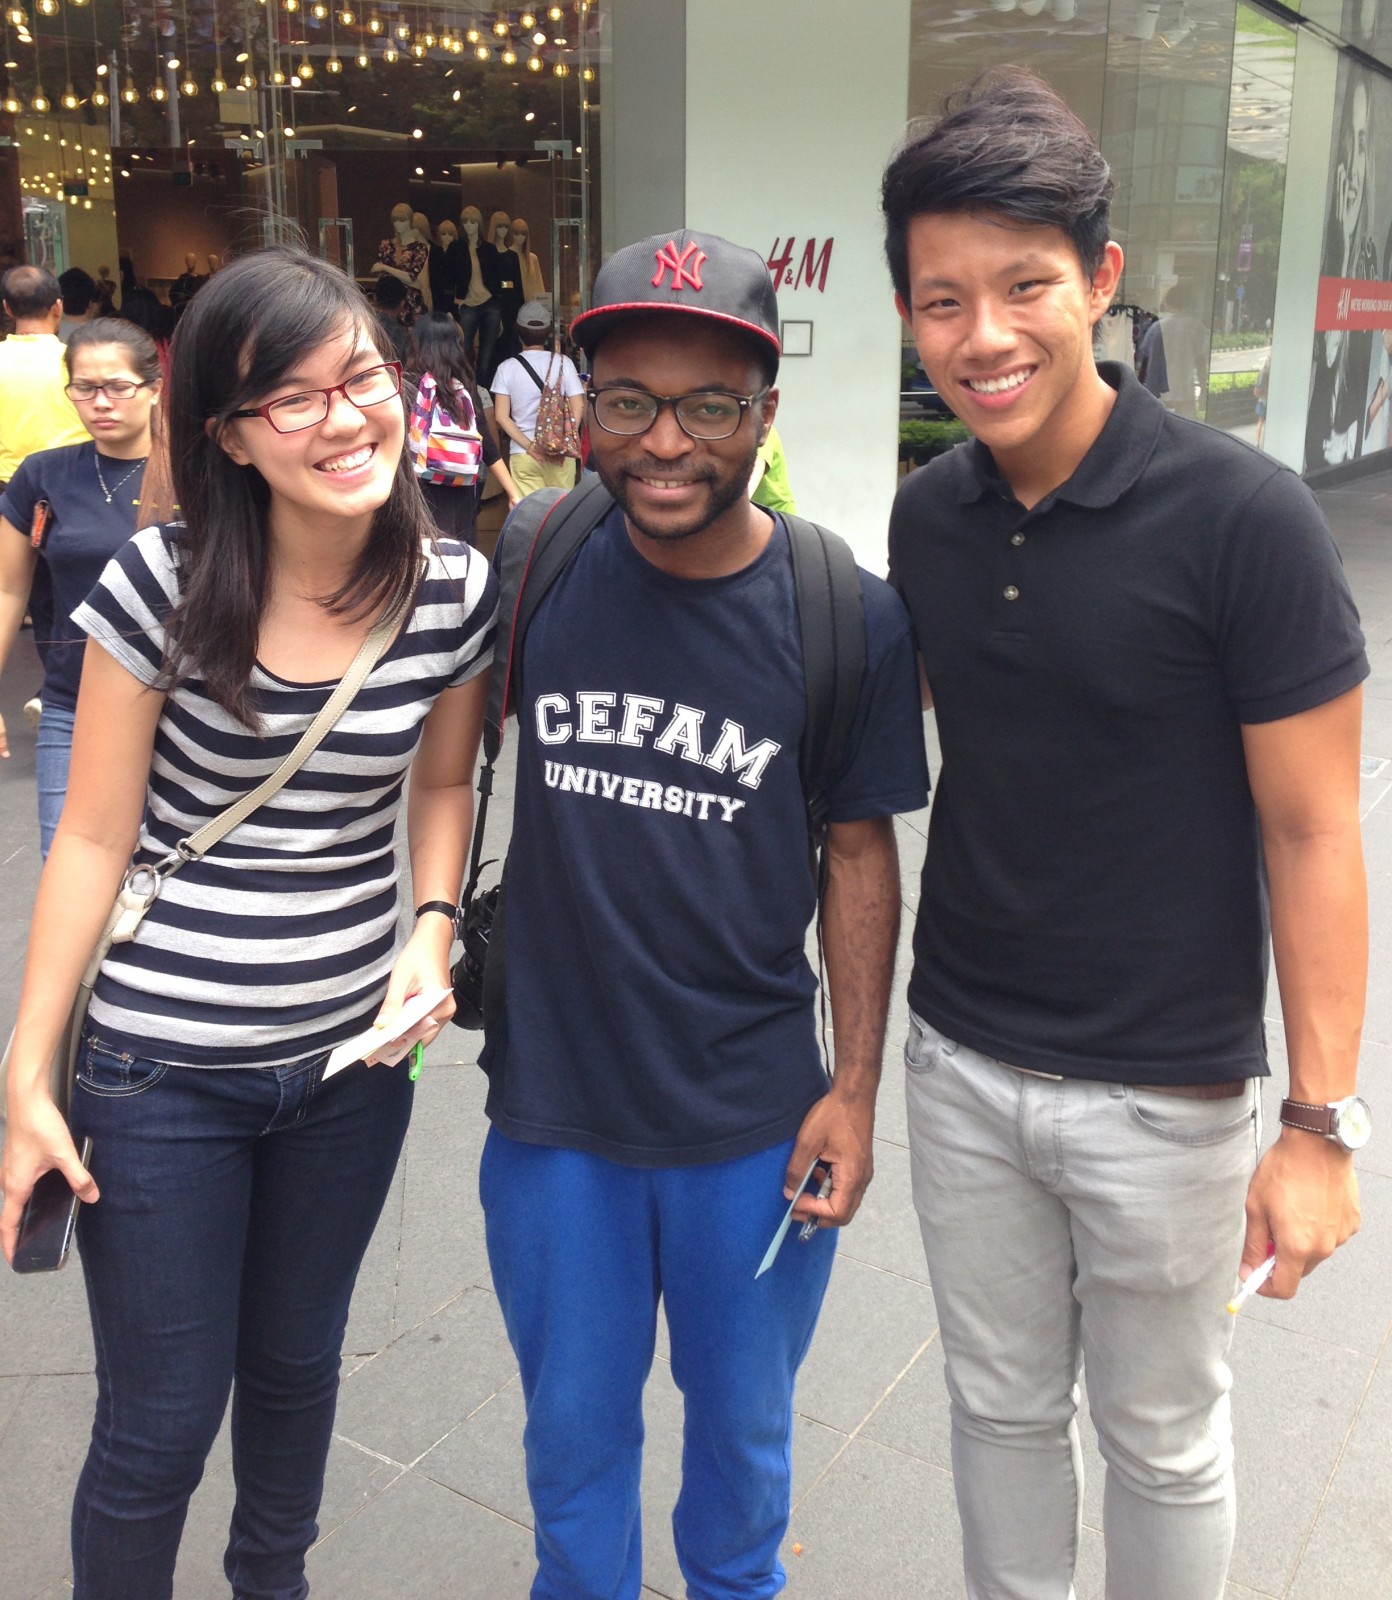 Kenneth (on the far right), his classmate (on the far left), and a stranger!